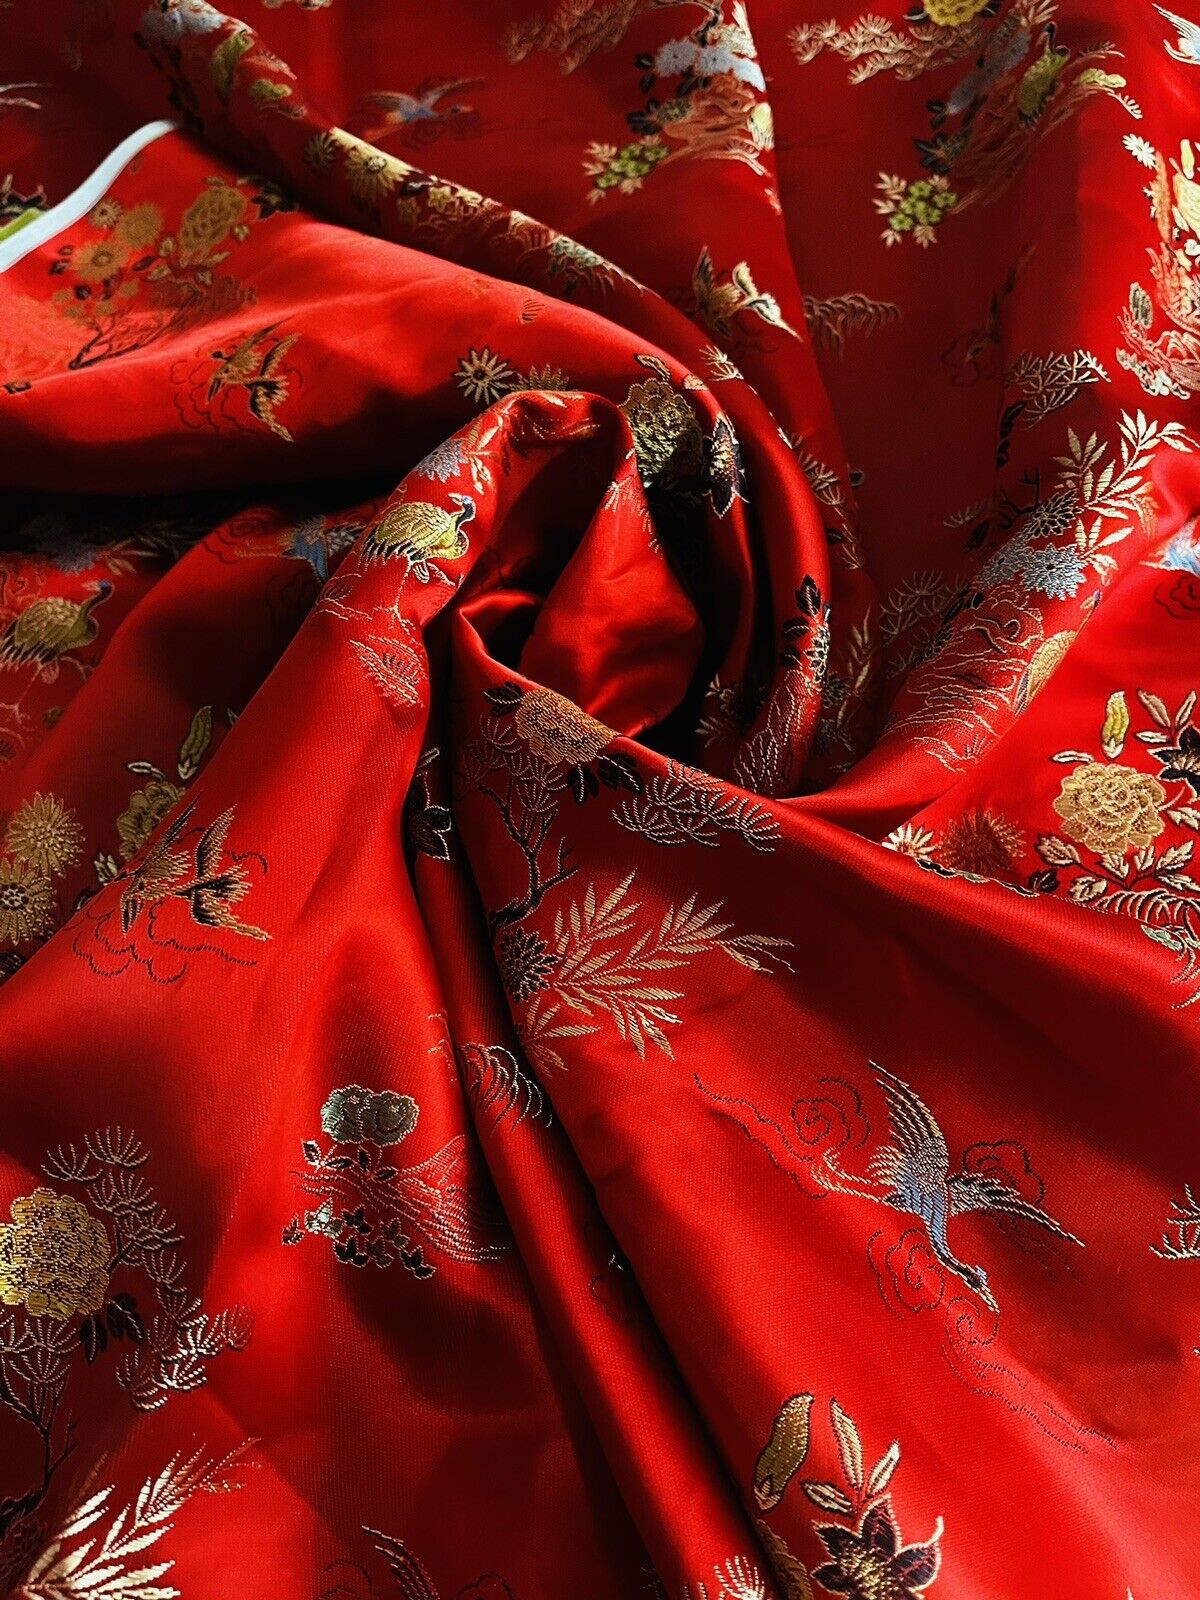 Vintage 6 Yards X 30” Chinese Red Silk Satin Jacquard Fabric Apparel Weight